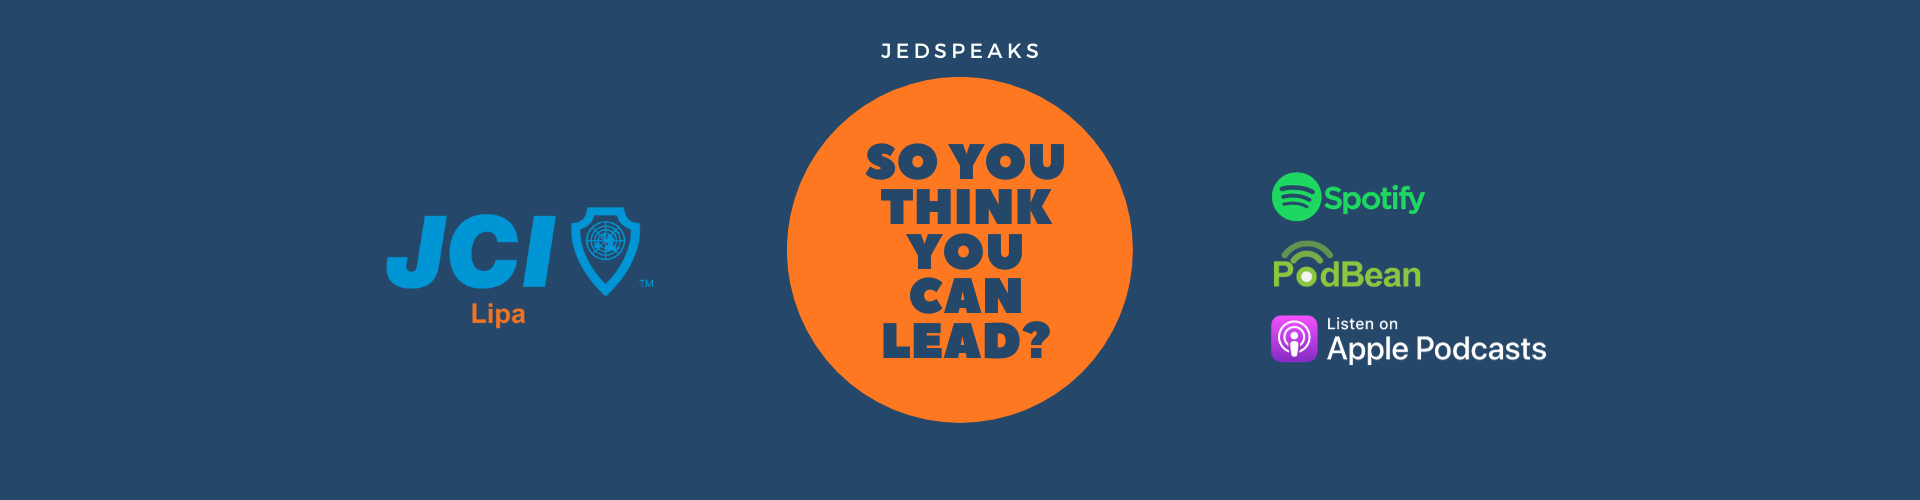 So You Think You Can Lead?